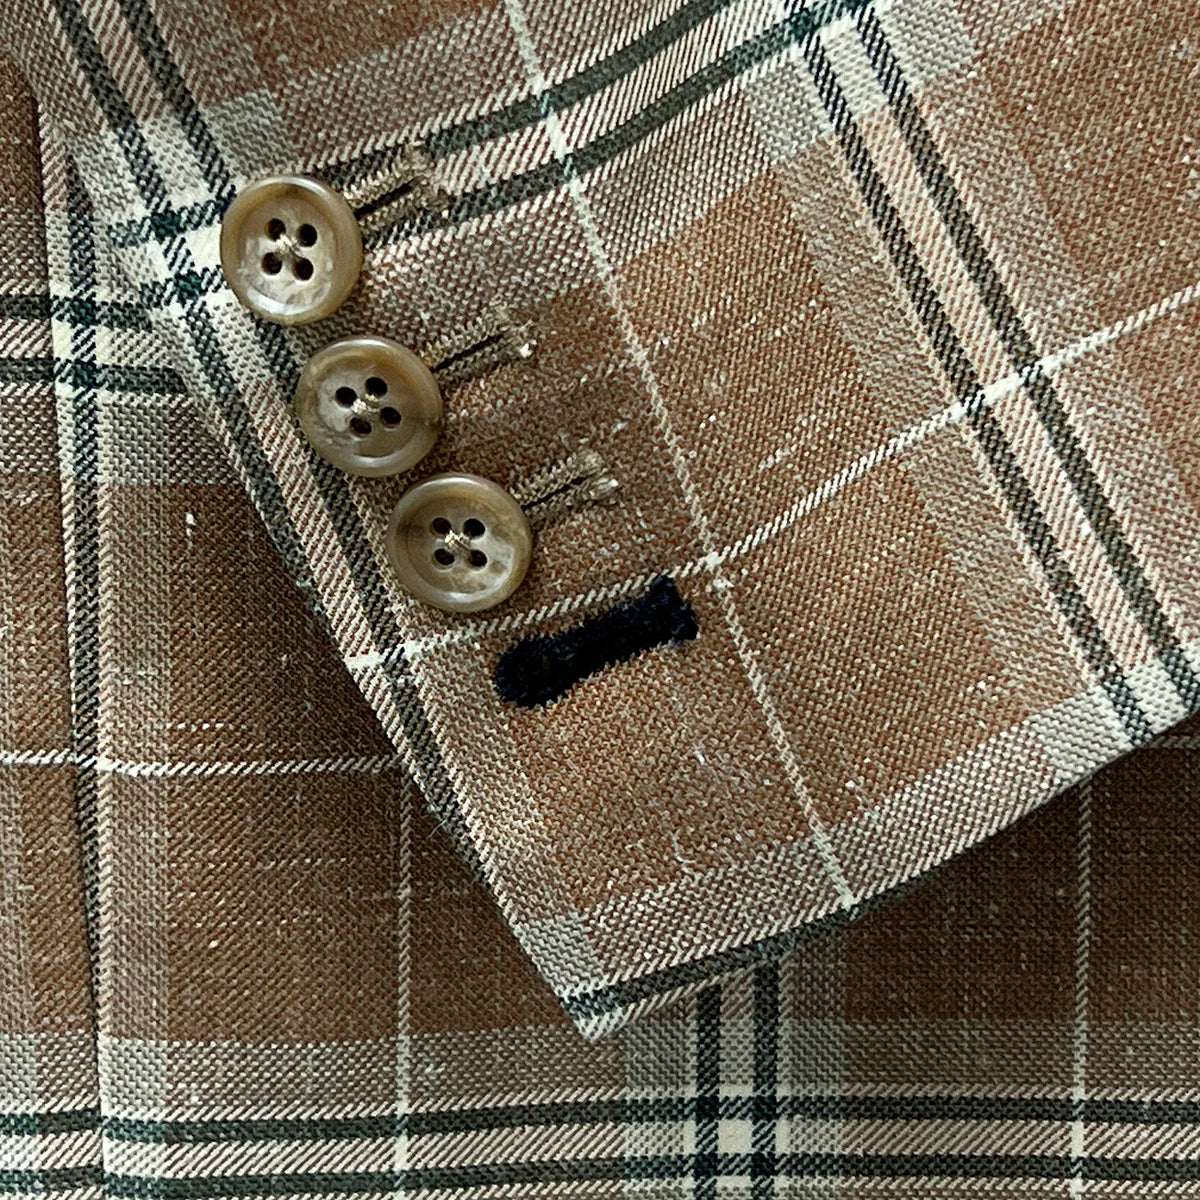 Functional sleeve buttonholes on a brown beige men's sport coat with blanched almond and midnight blue windowpane pattern.